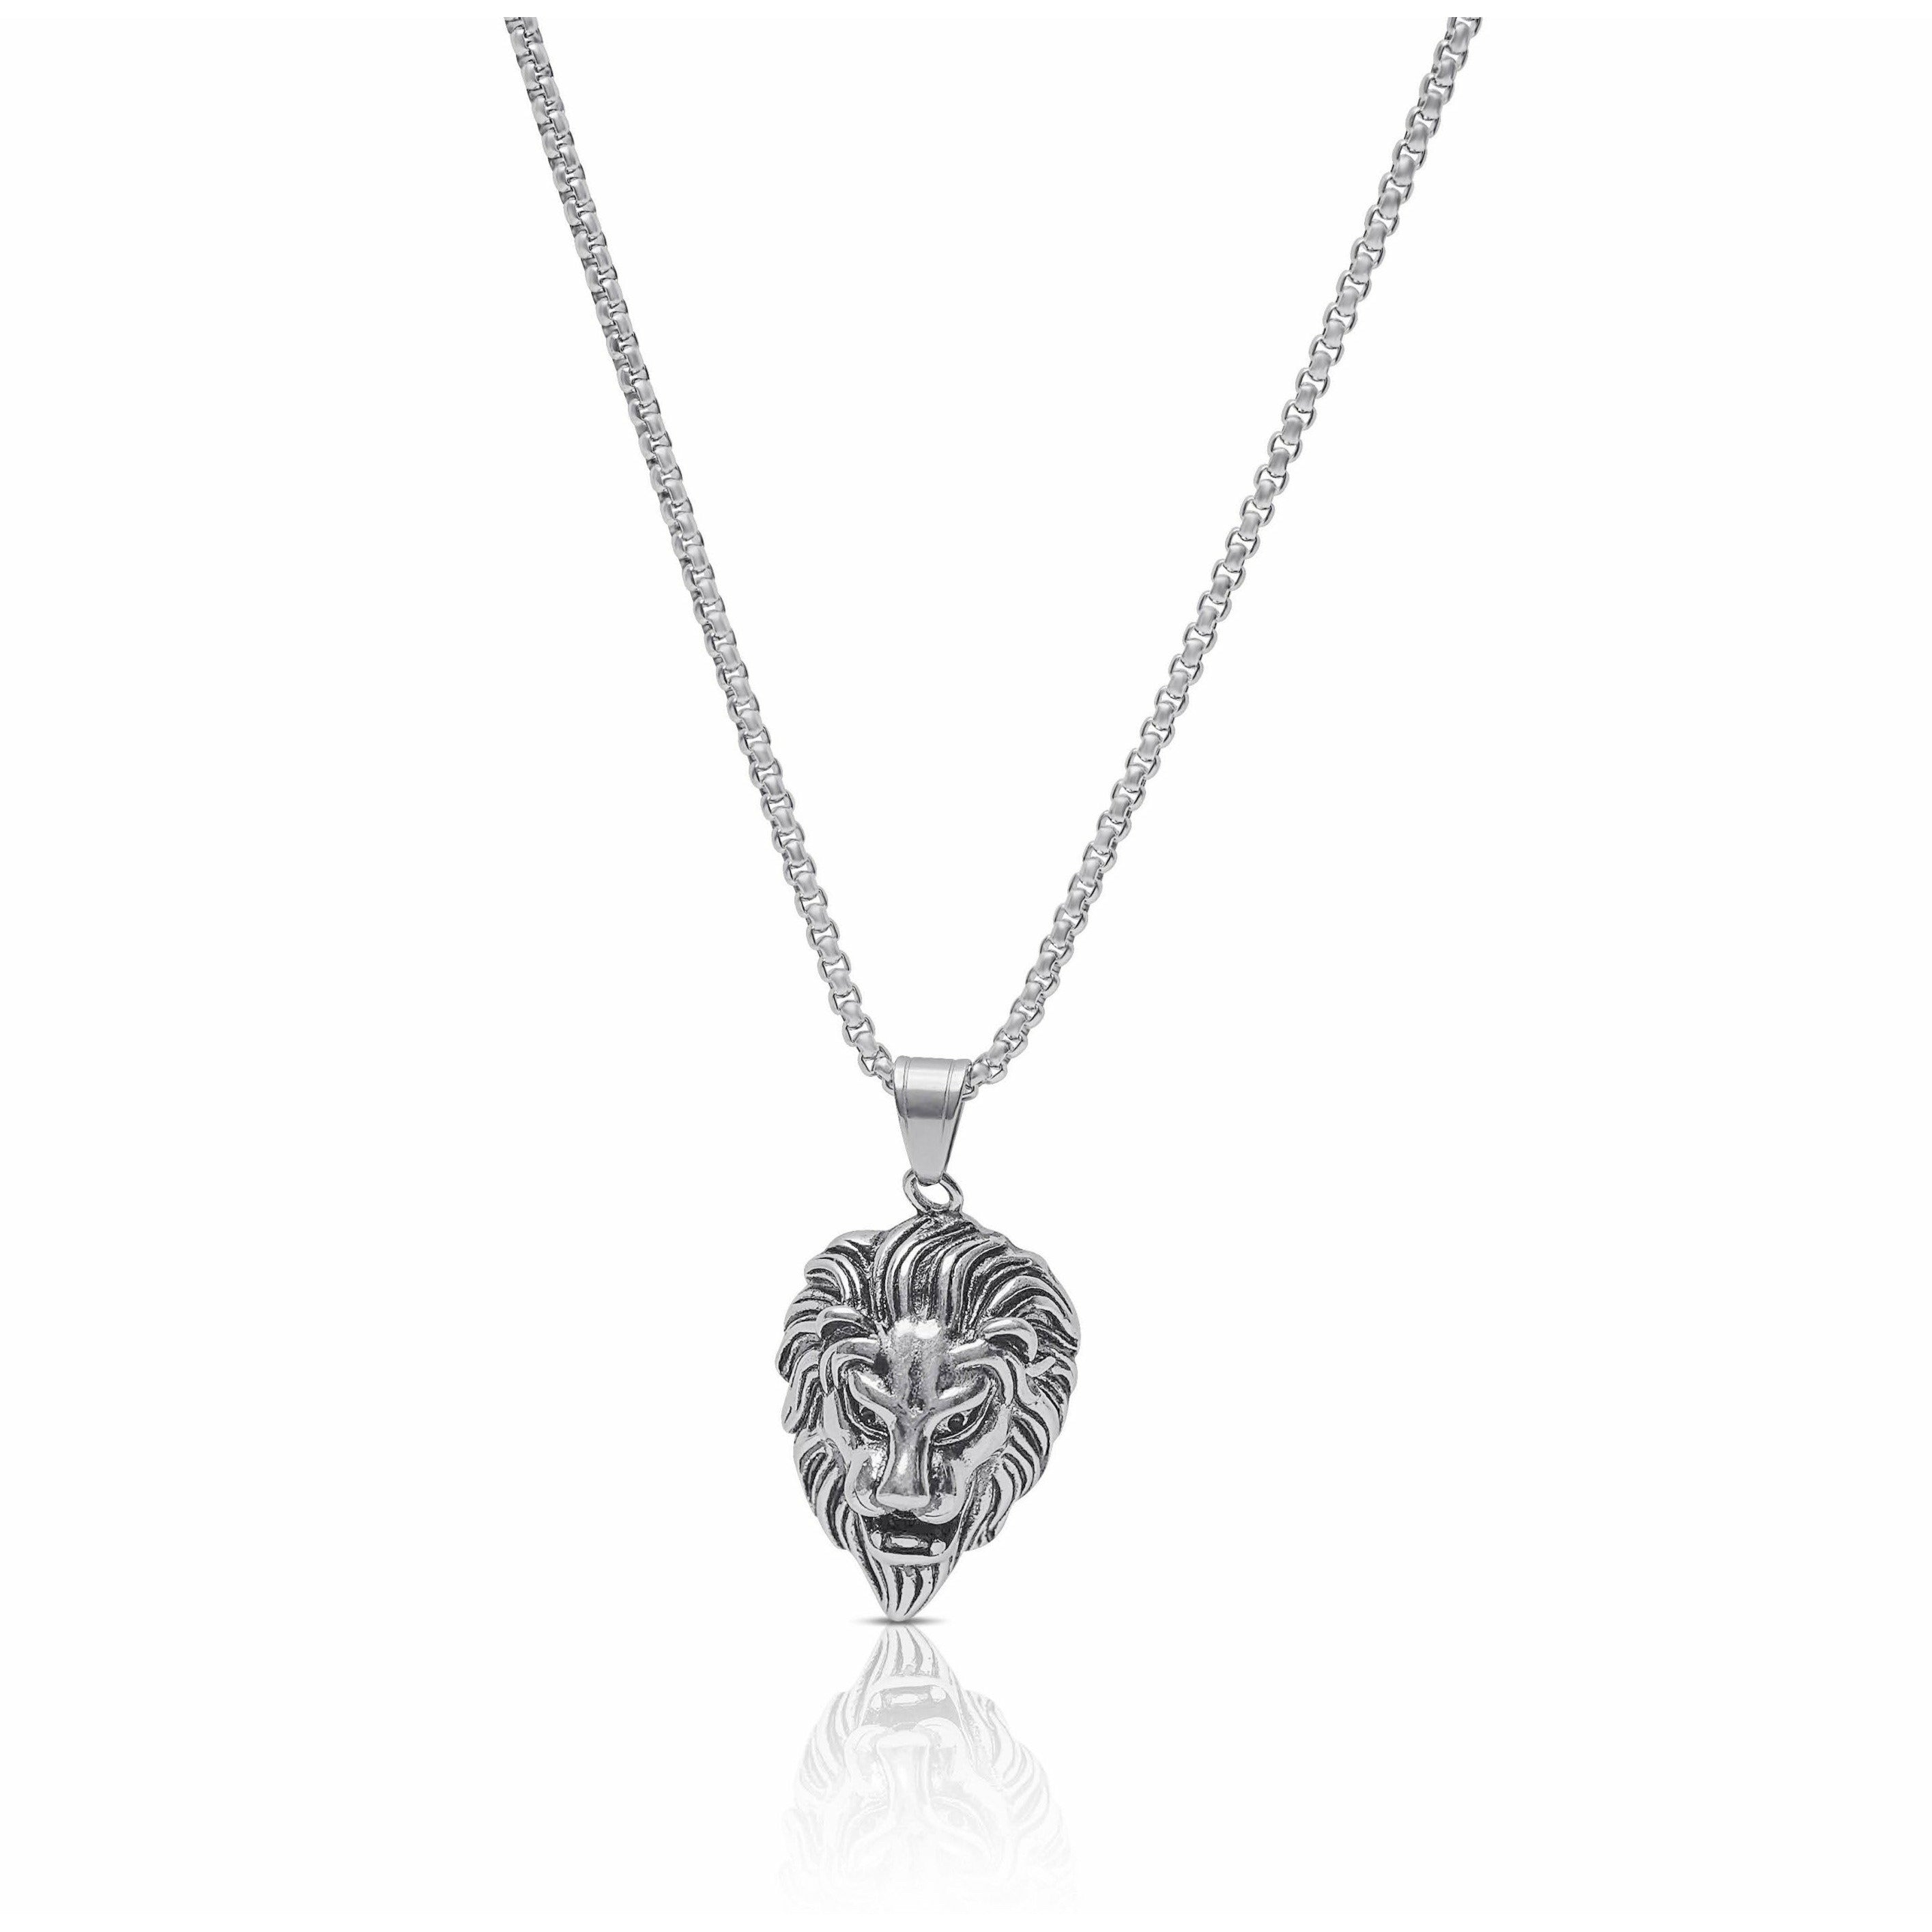 Men's Silver Lion Necklace - House of Jewels Miami